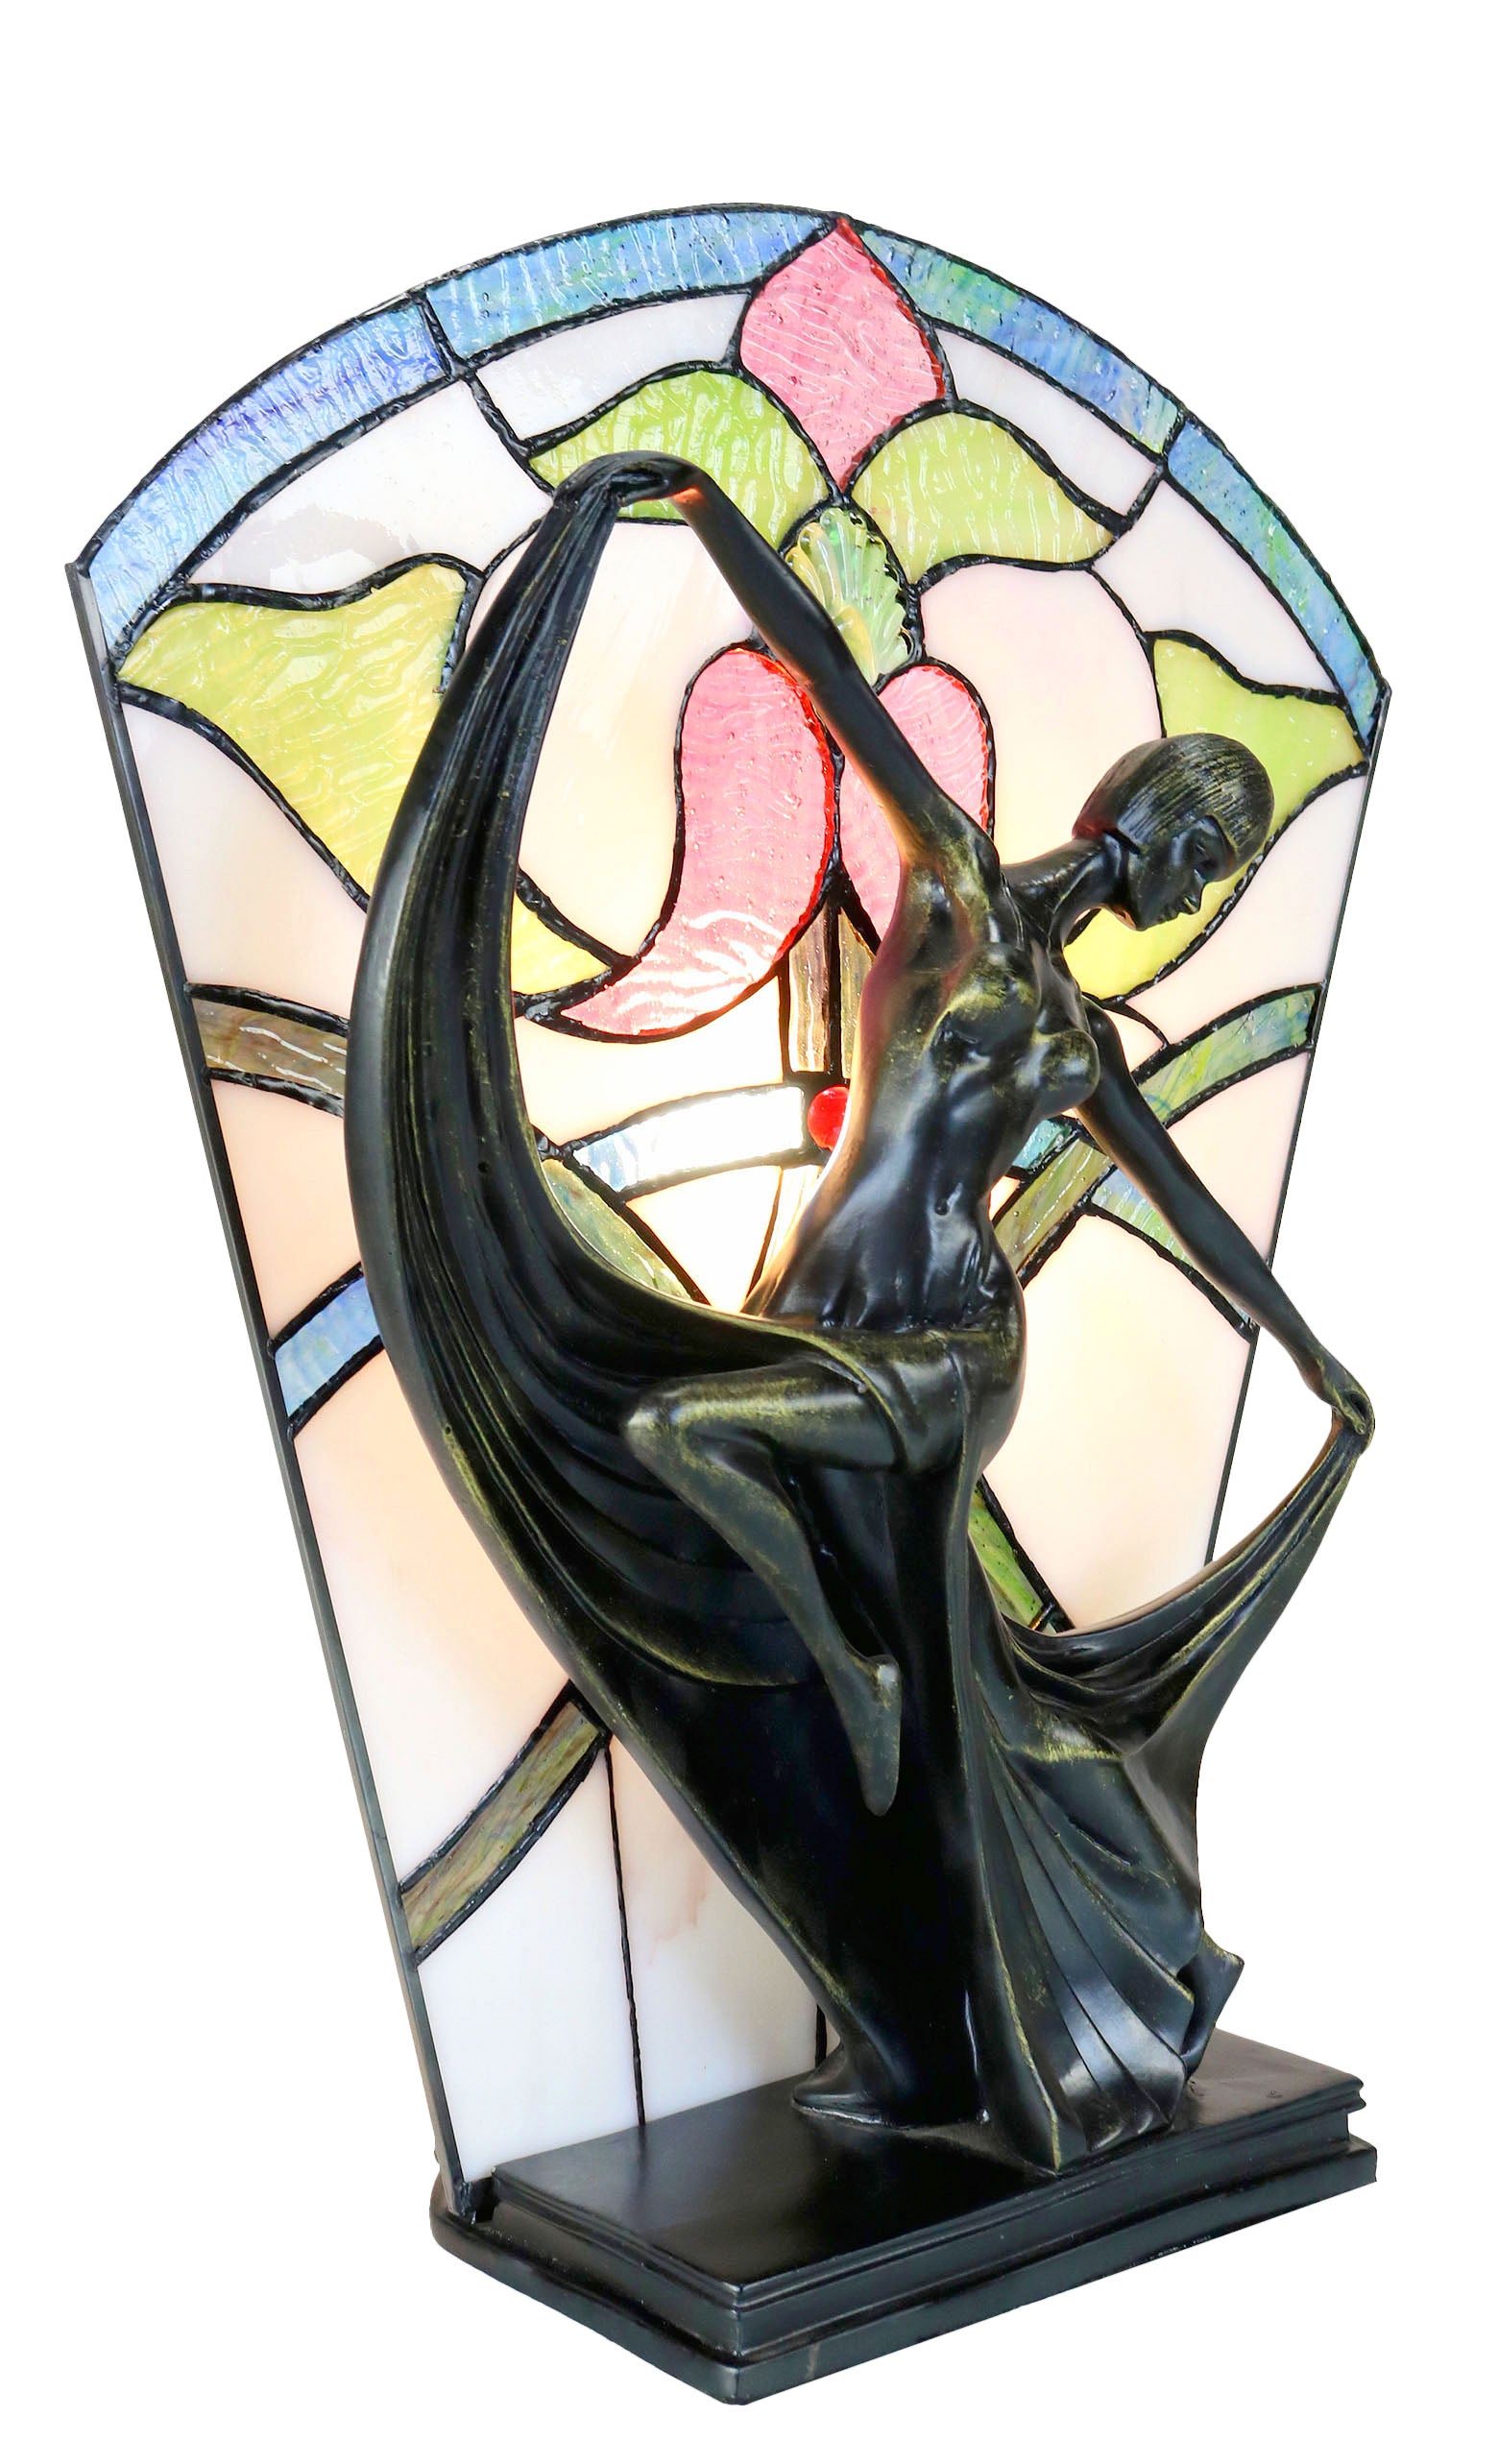 Floral Art Deco Dancer Figurines Tiffany Stained Glass  Lamp